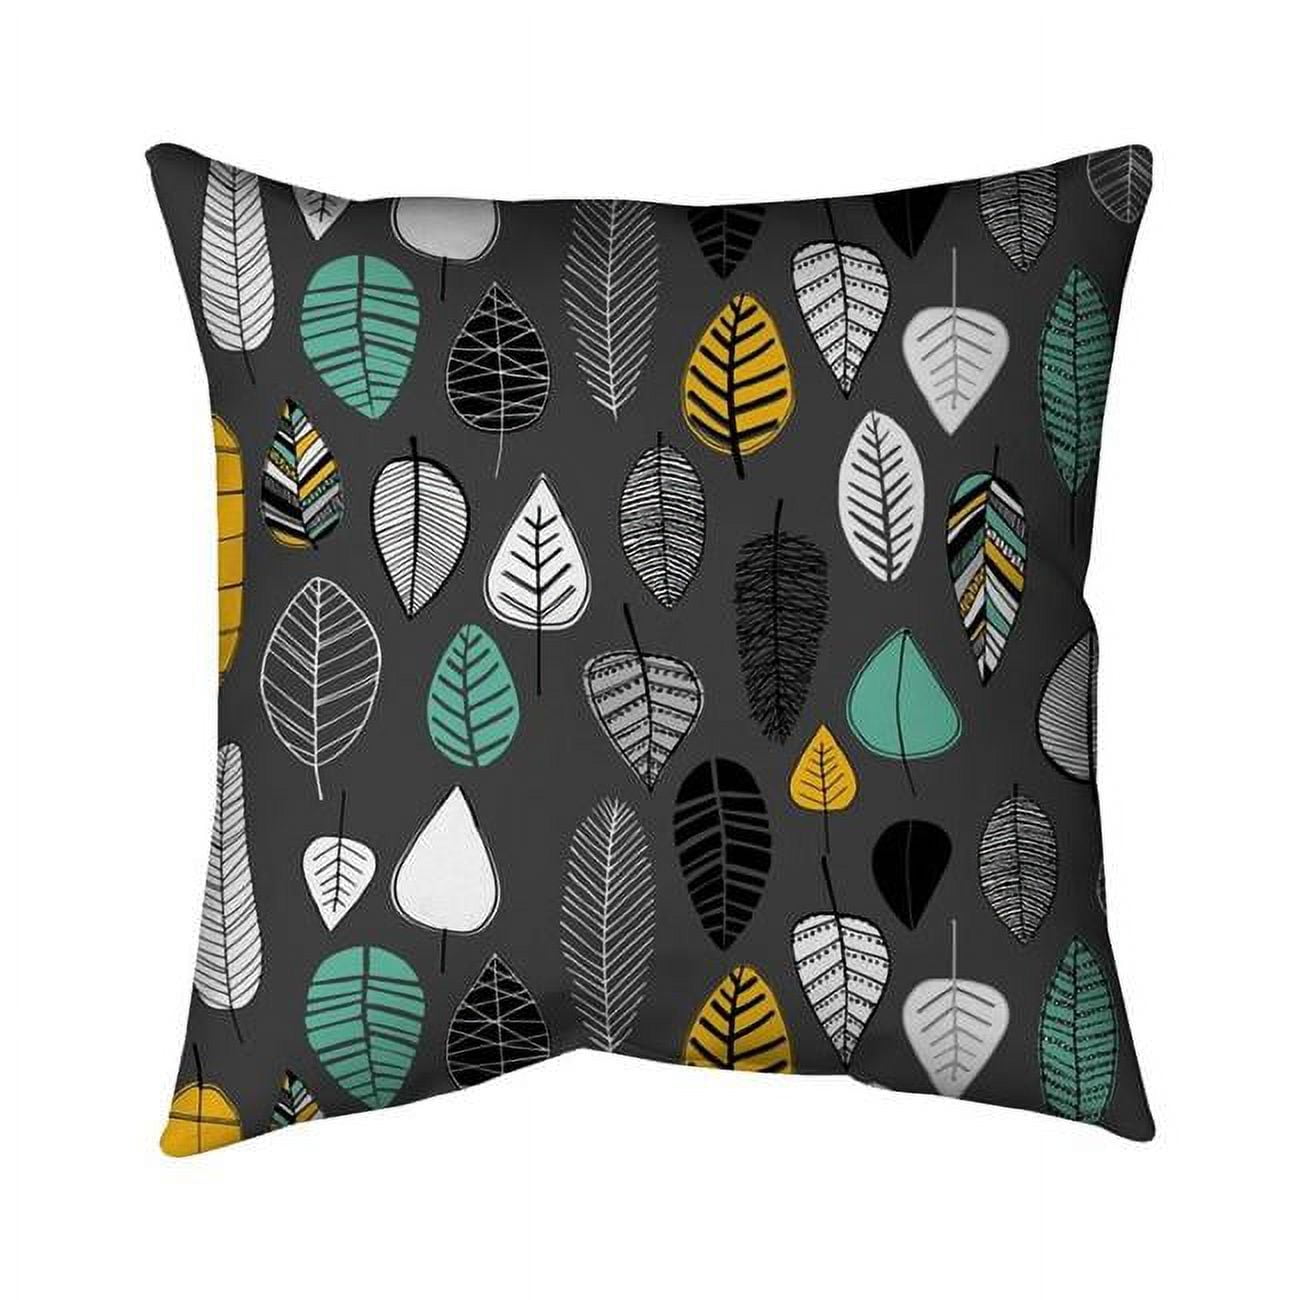 Begin Home Decor 5541-2626-MI74 26 x 26 in. Leaves Illustration-Double Sided Print Indoor Pillow